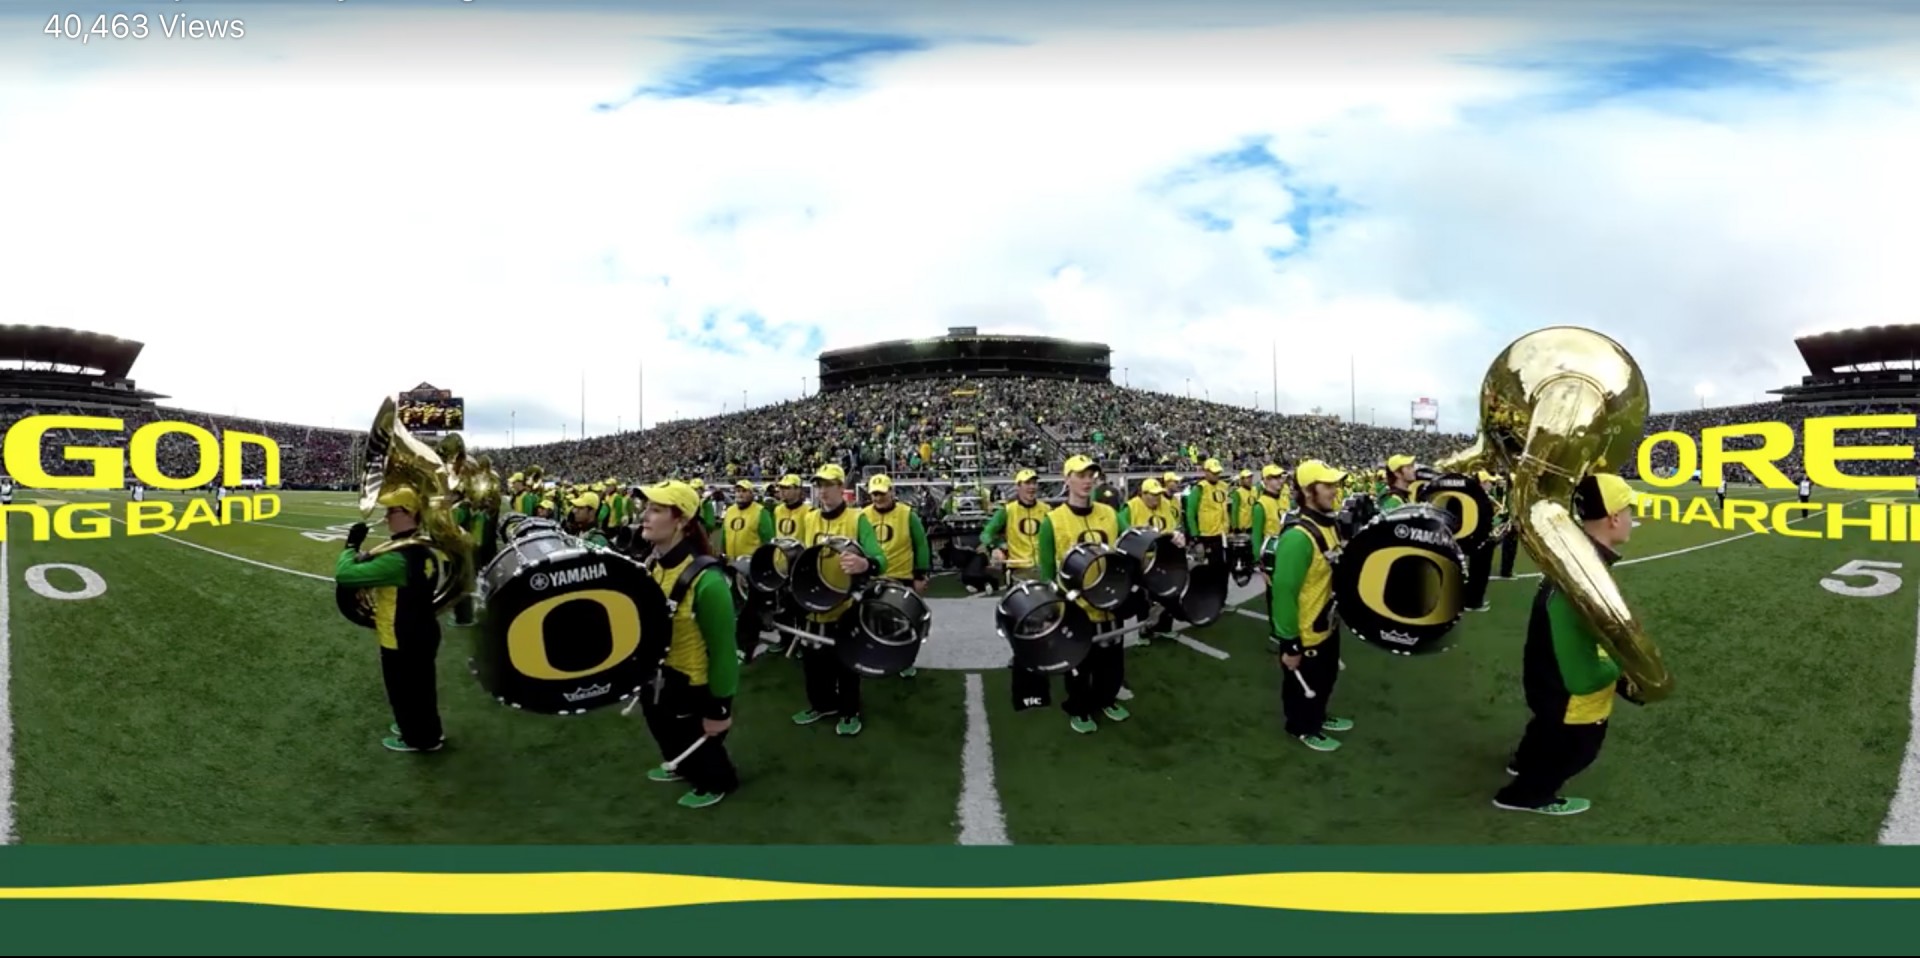 University of Oregon School of Music & Dance Steps Up Their Game in 360 Video